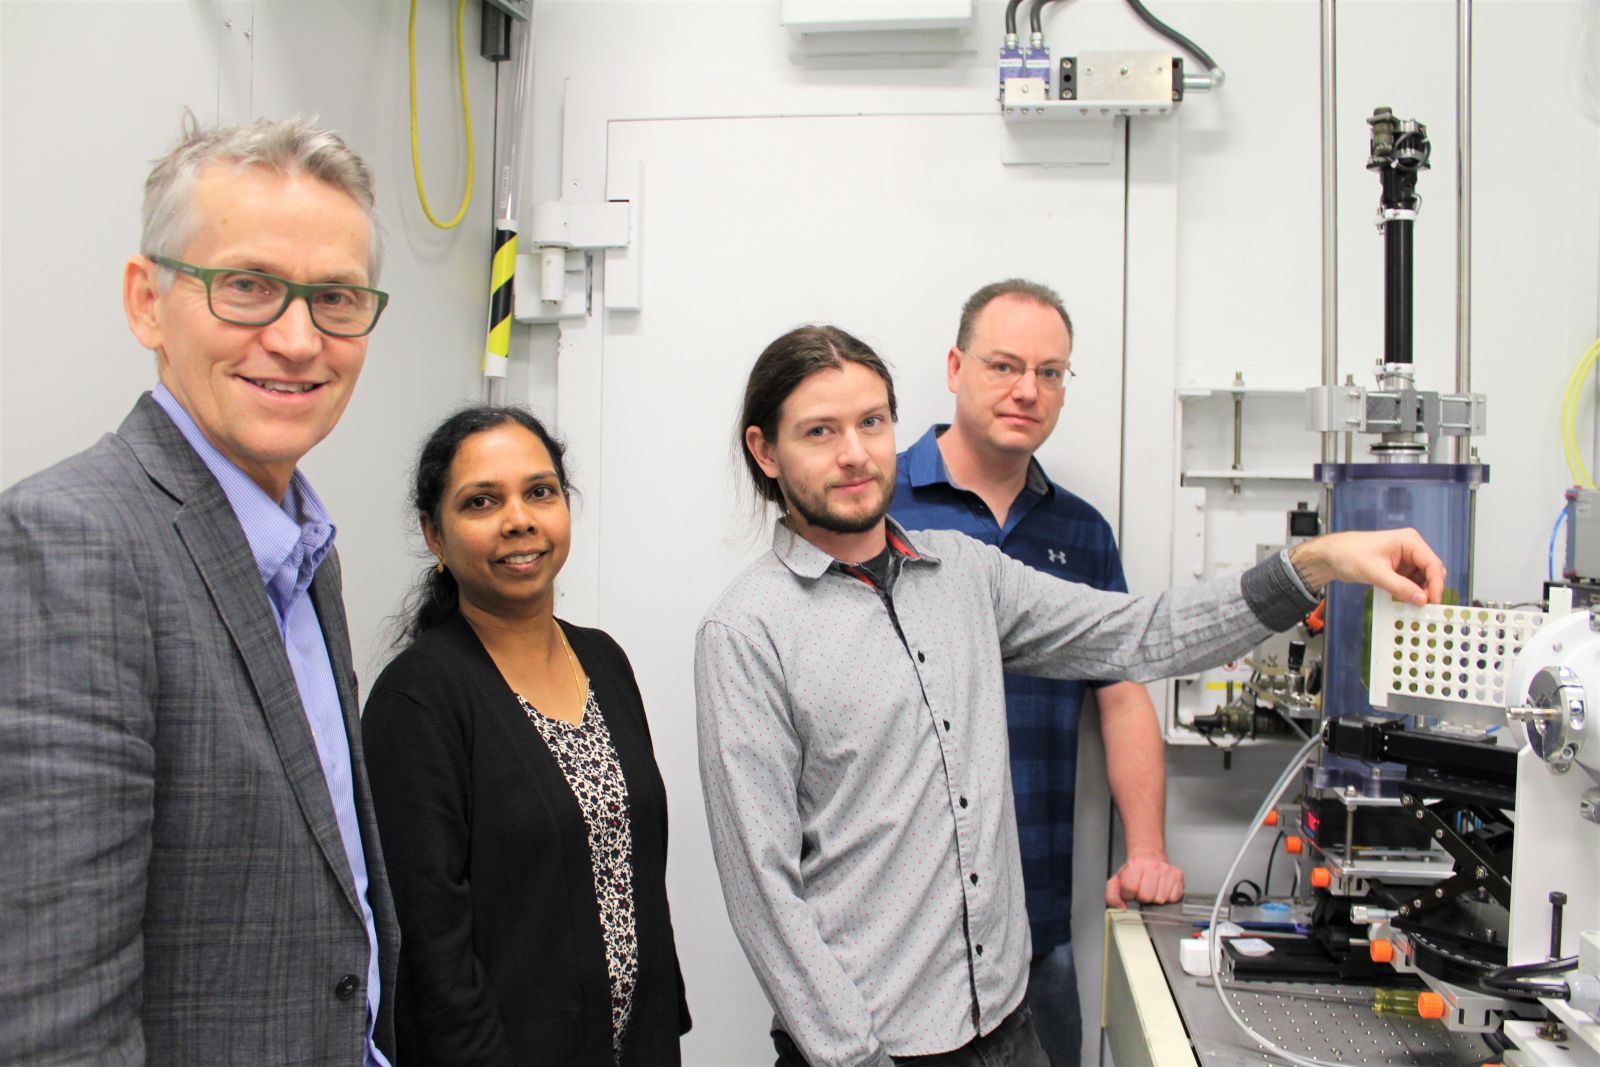 (Left to right) Scientists Tom Warkentin, Chithra Karunakaran, Jarvis Stobbs, and David Muir at the IDEAS beamline at the CLS.